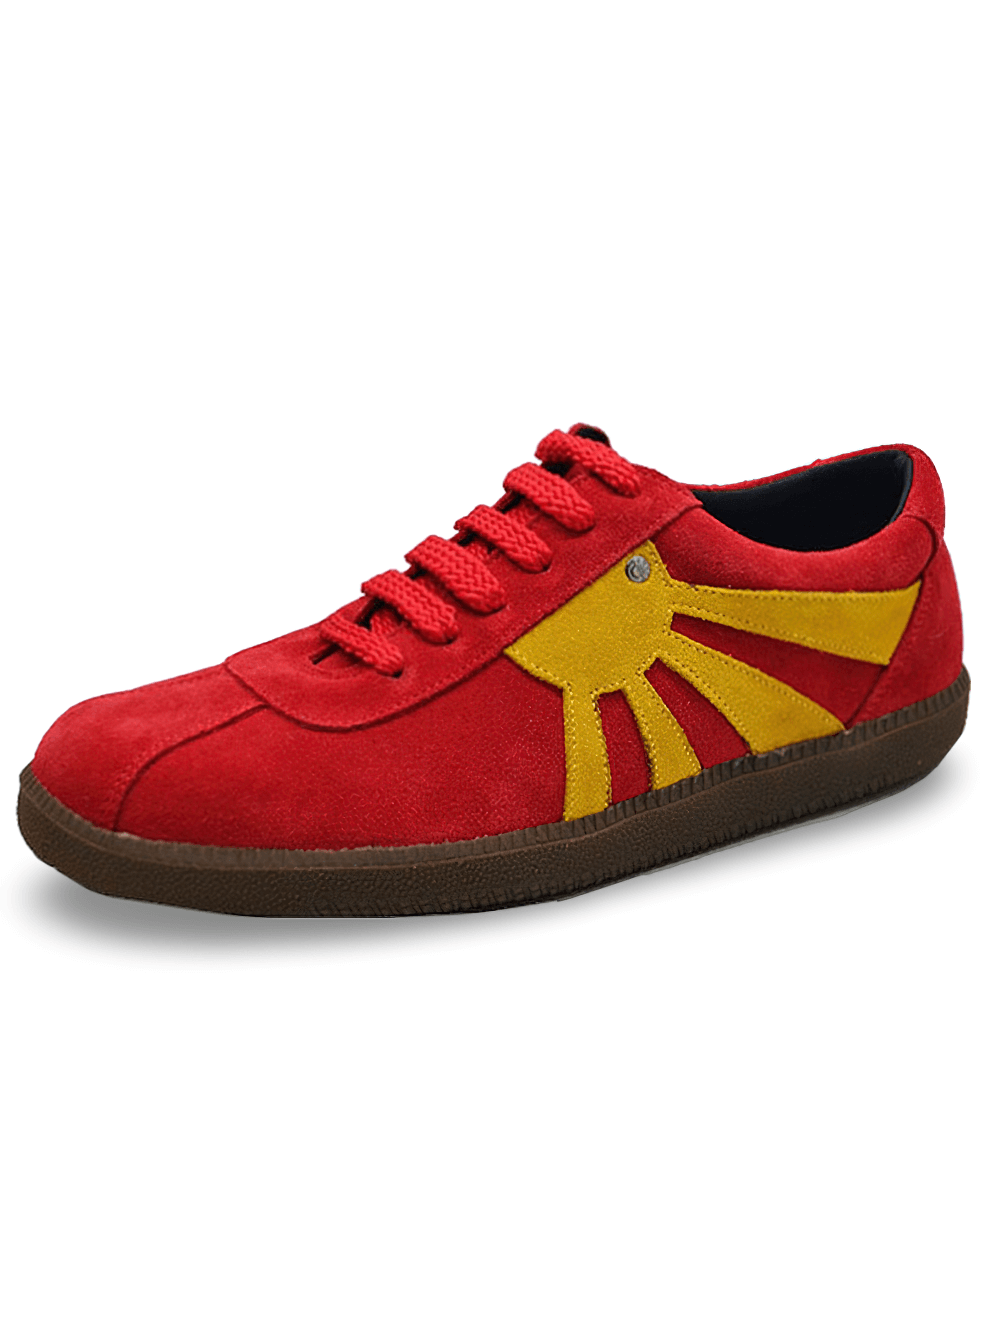 Lace-Up Red Suede Sneakers with Rubber Platform Sole